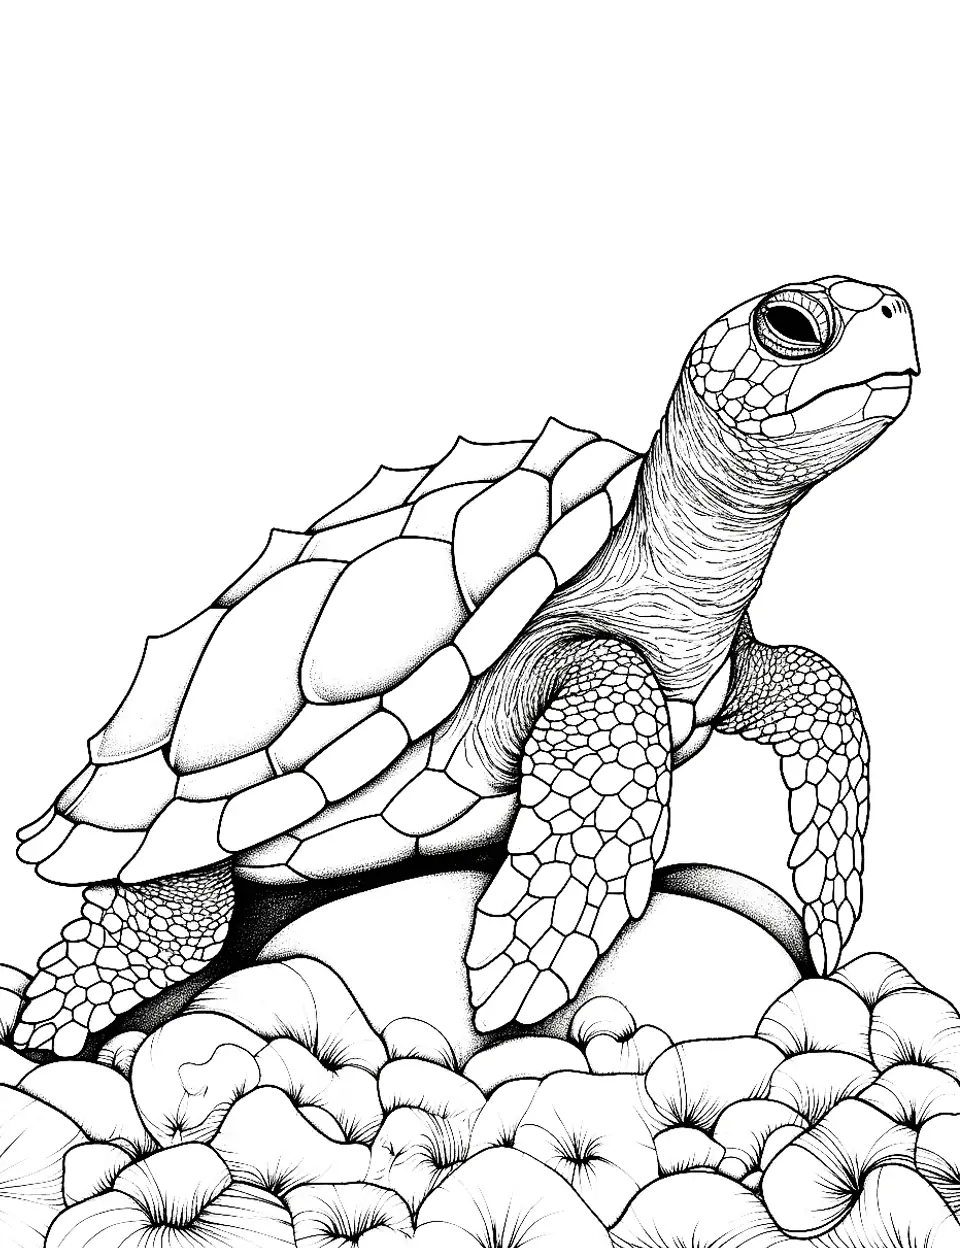 Turtle's Sunny Bask Adult Coloring Page - A turtle resting on a rock, soaking up the sun.